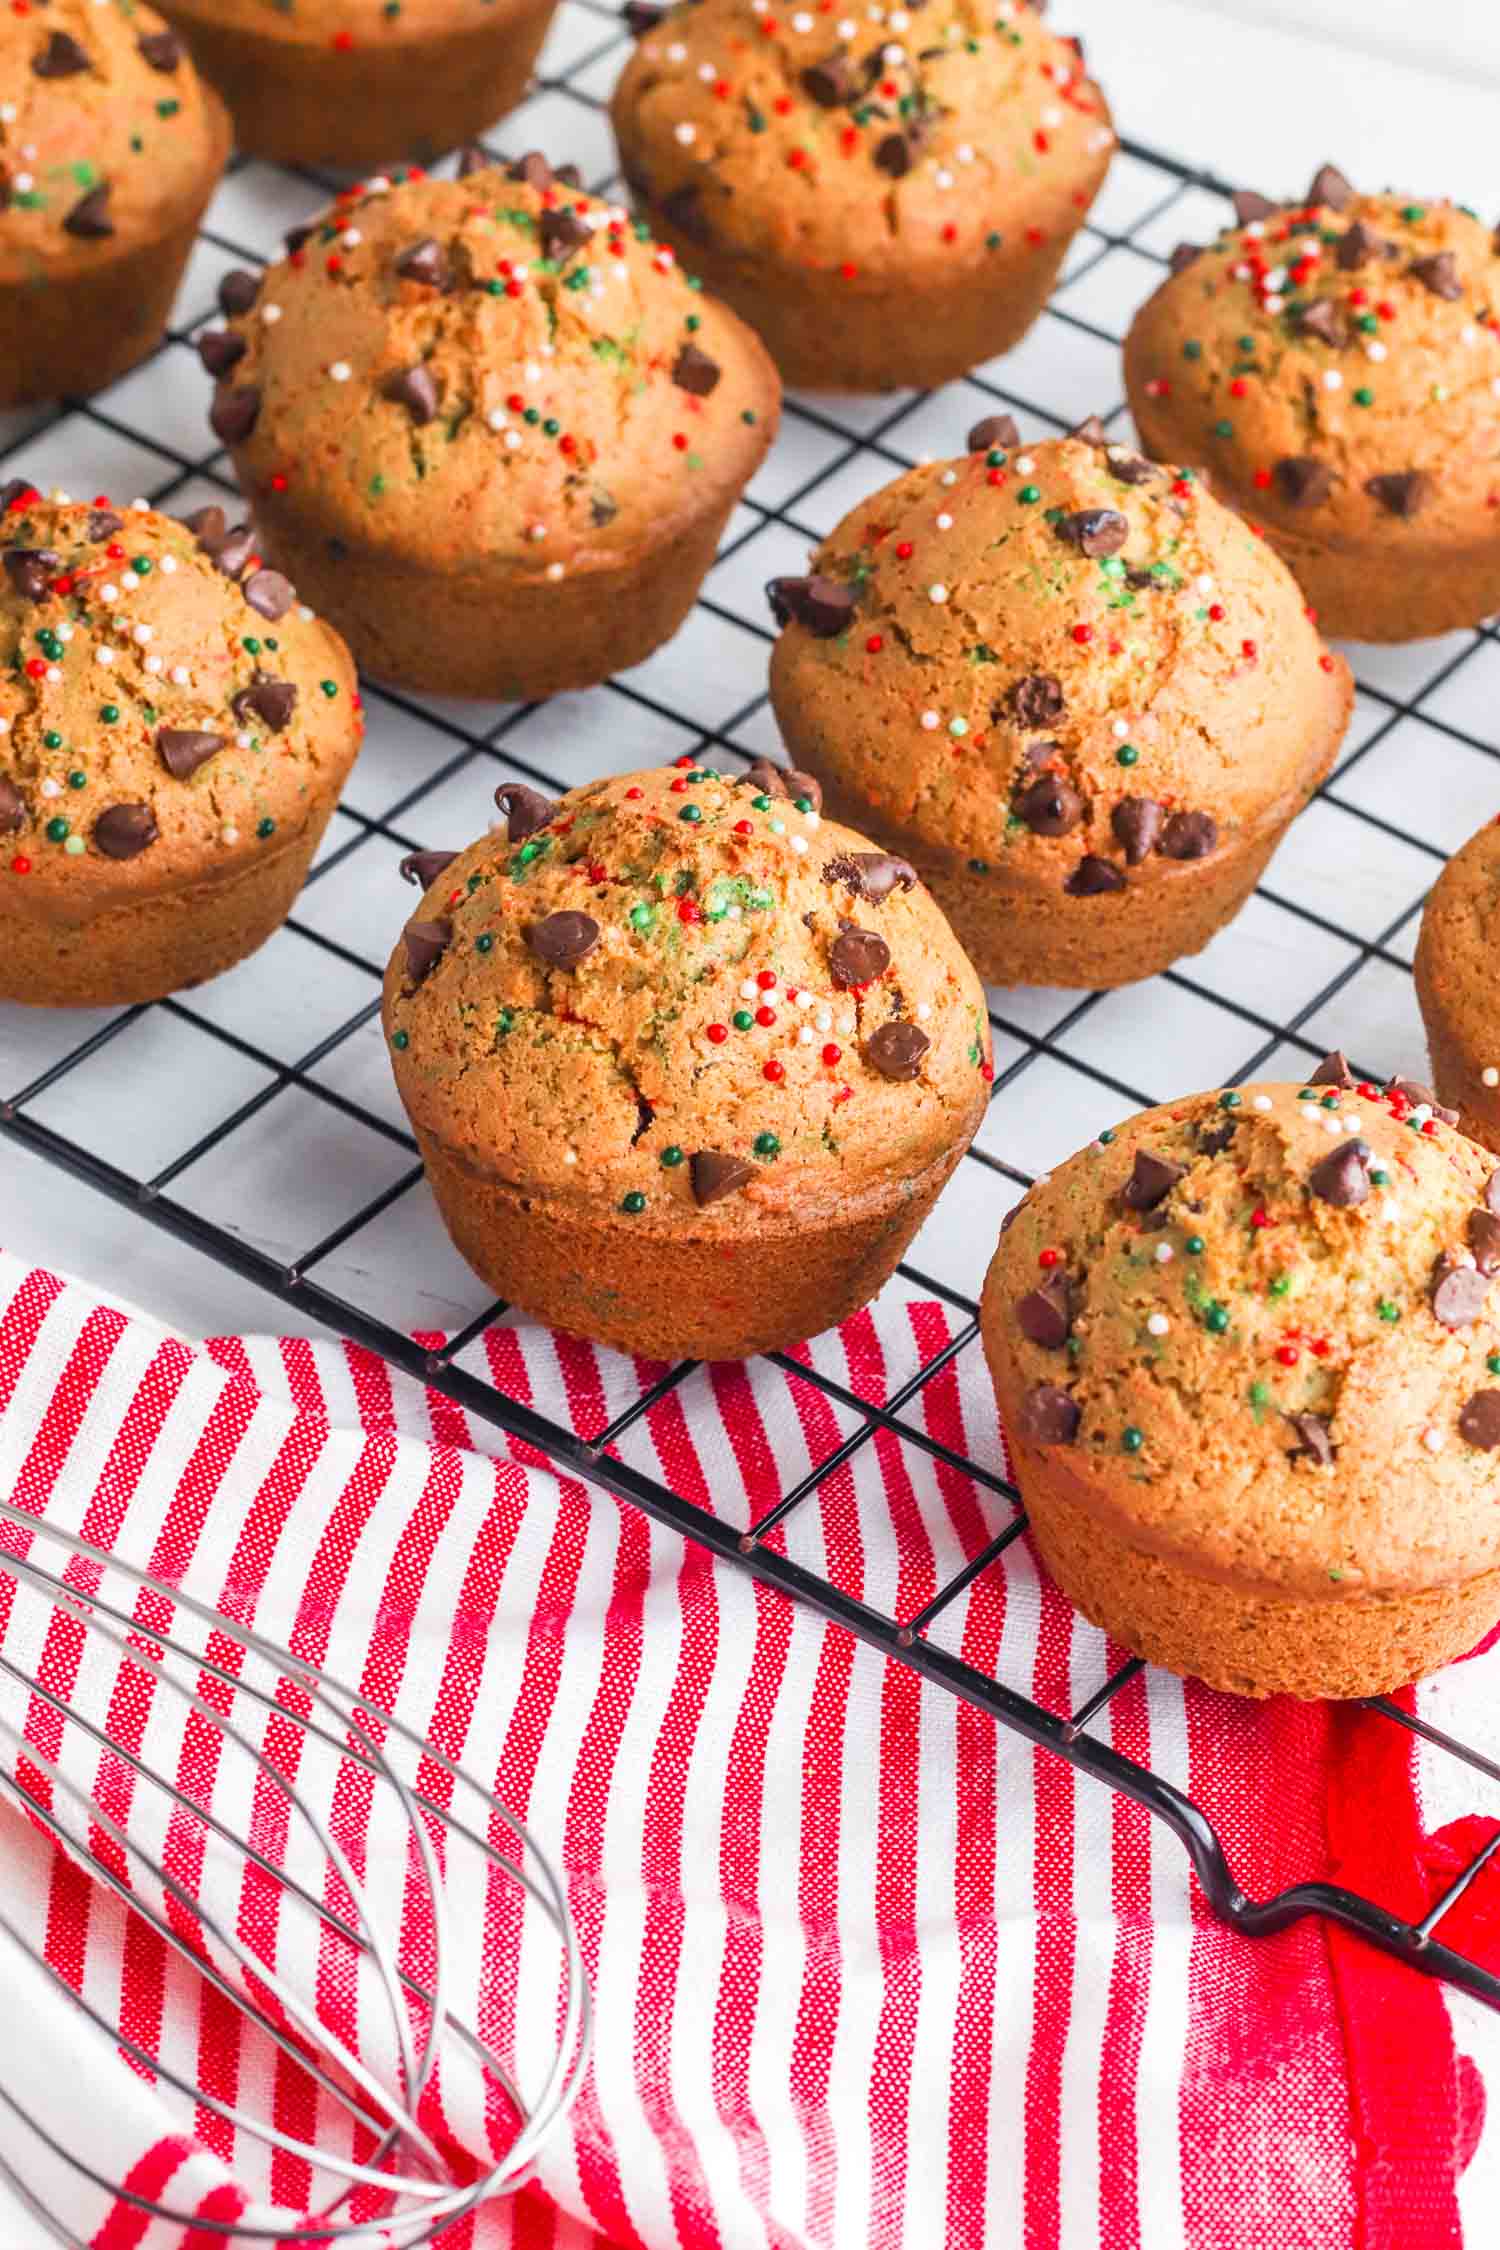 Festive Christmas Muffins - Easy to Make with Kids!